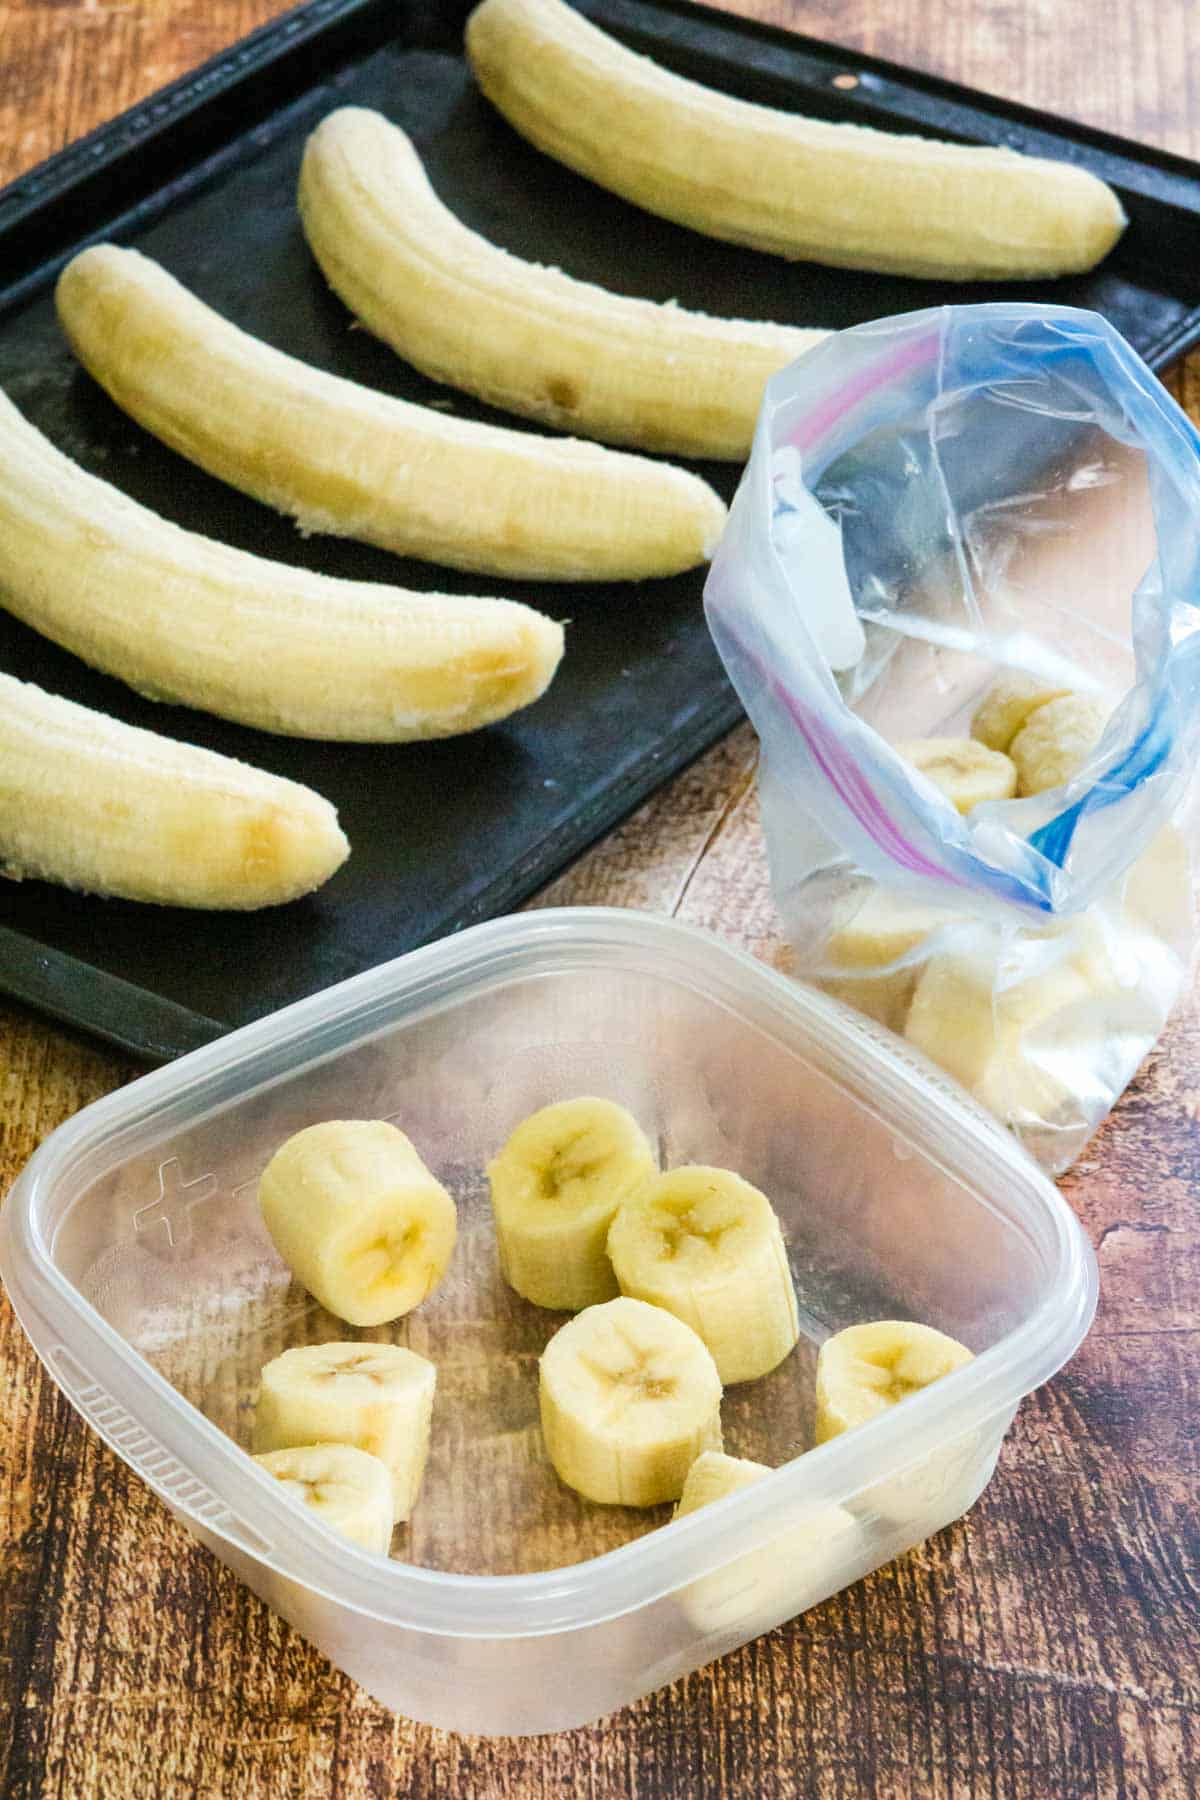 A baggie and a tupperware full of banana slices next to a baking sheet with five whole peeled bananas spread across it